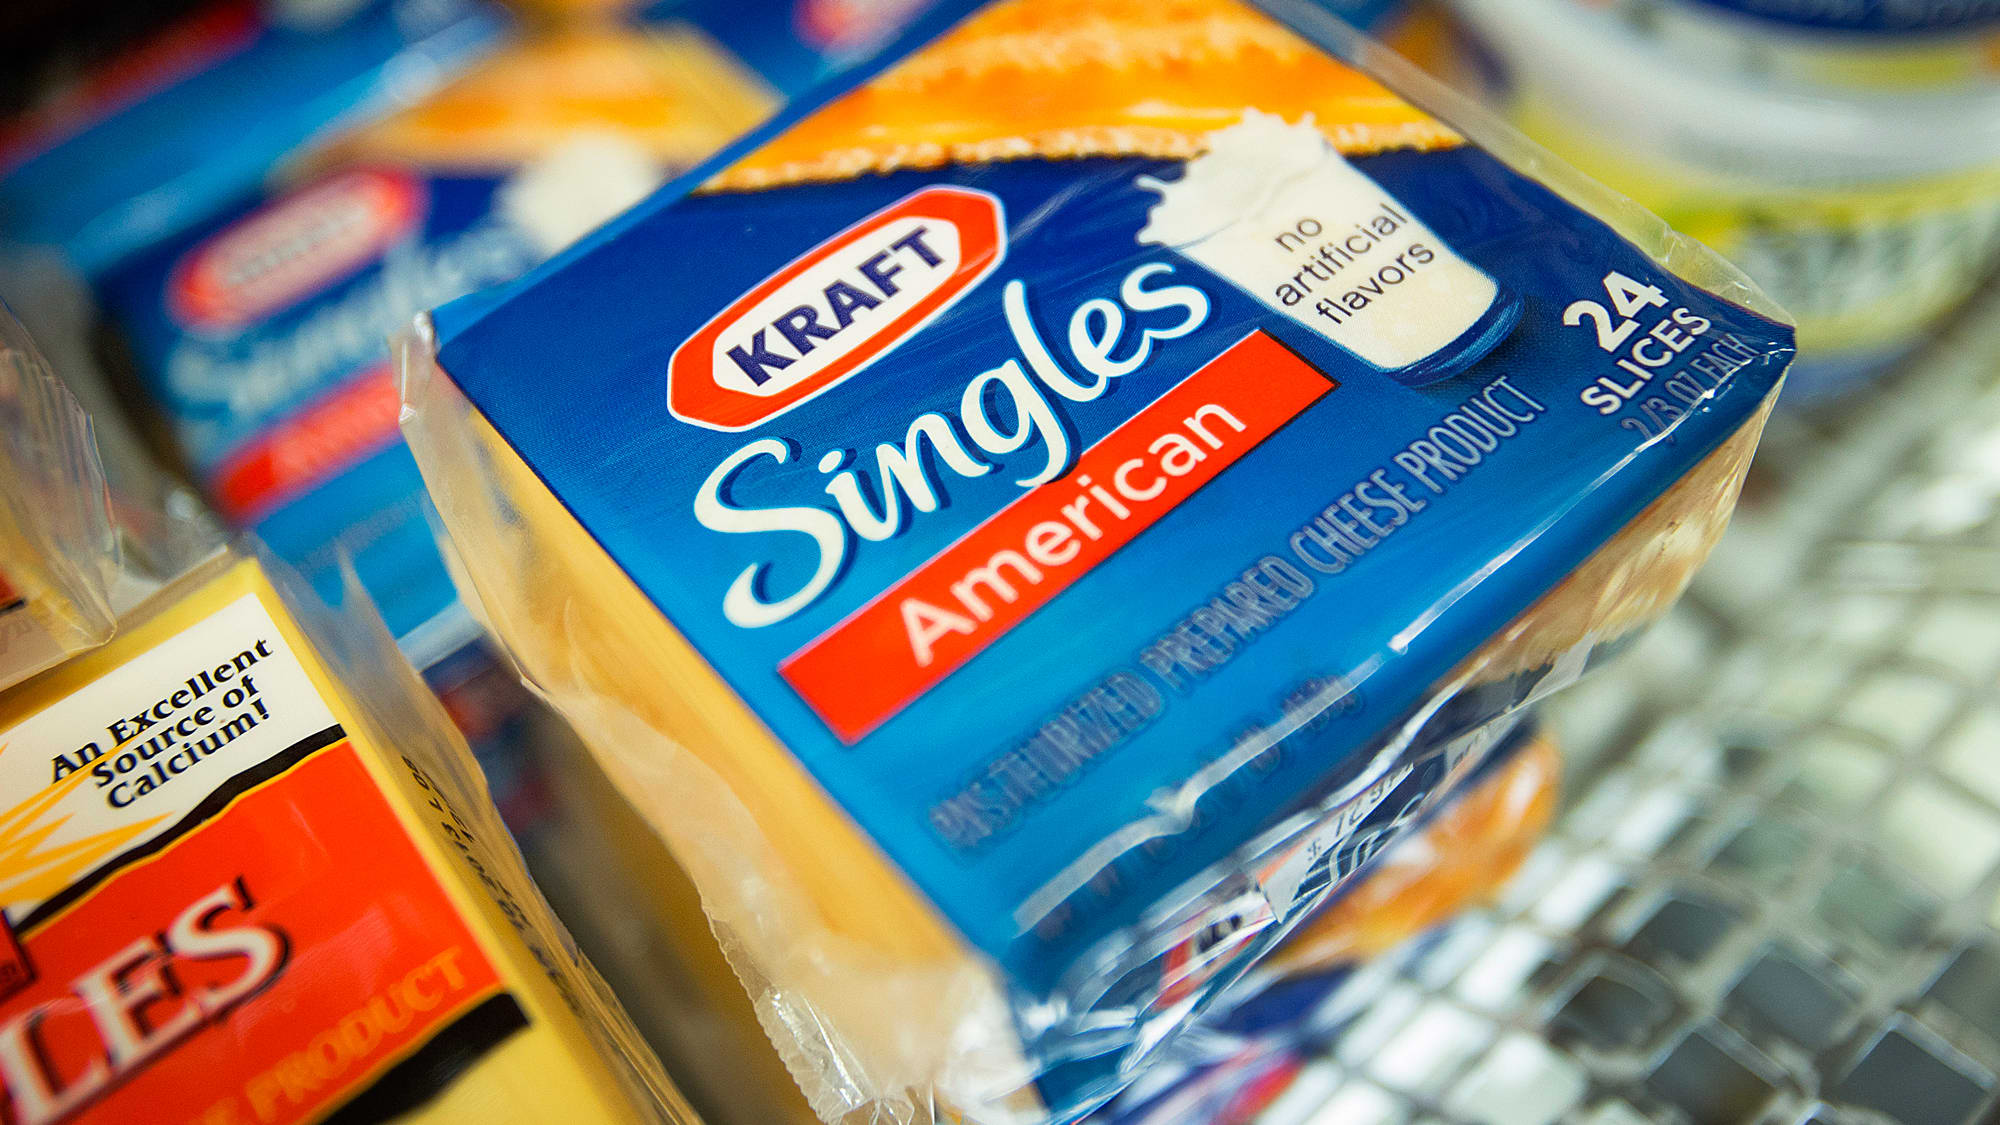 Packages of Kraft Foods' Singles cheese slices are displayed at a supermarket in New York.